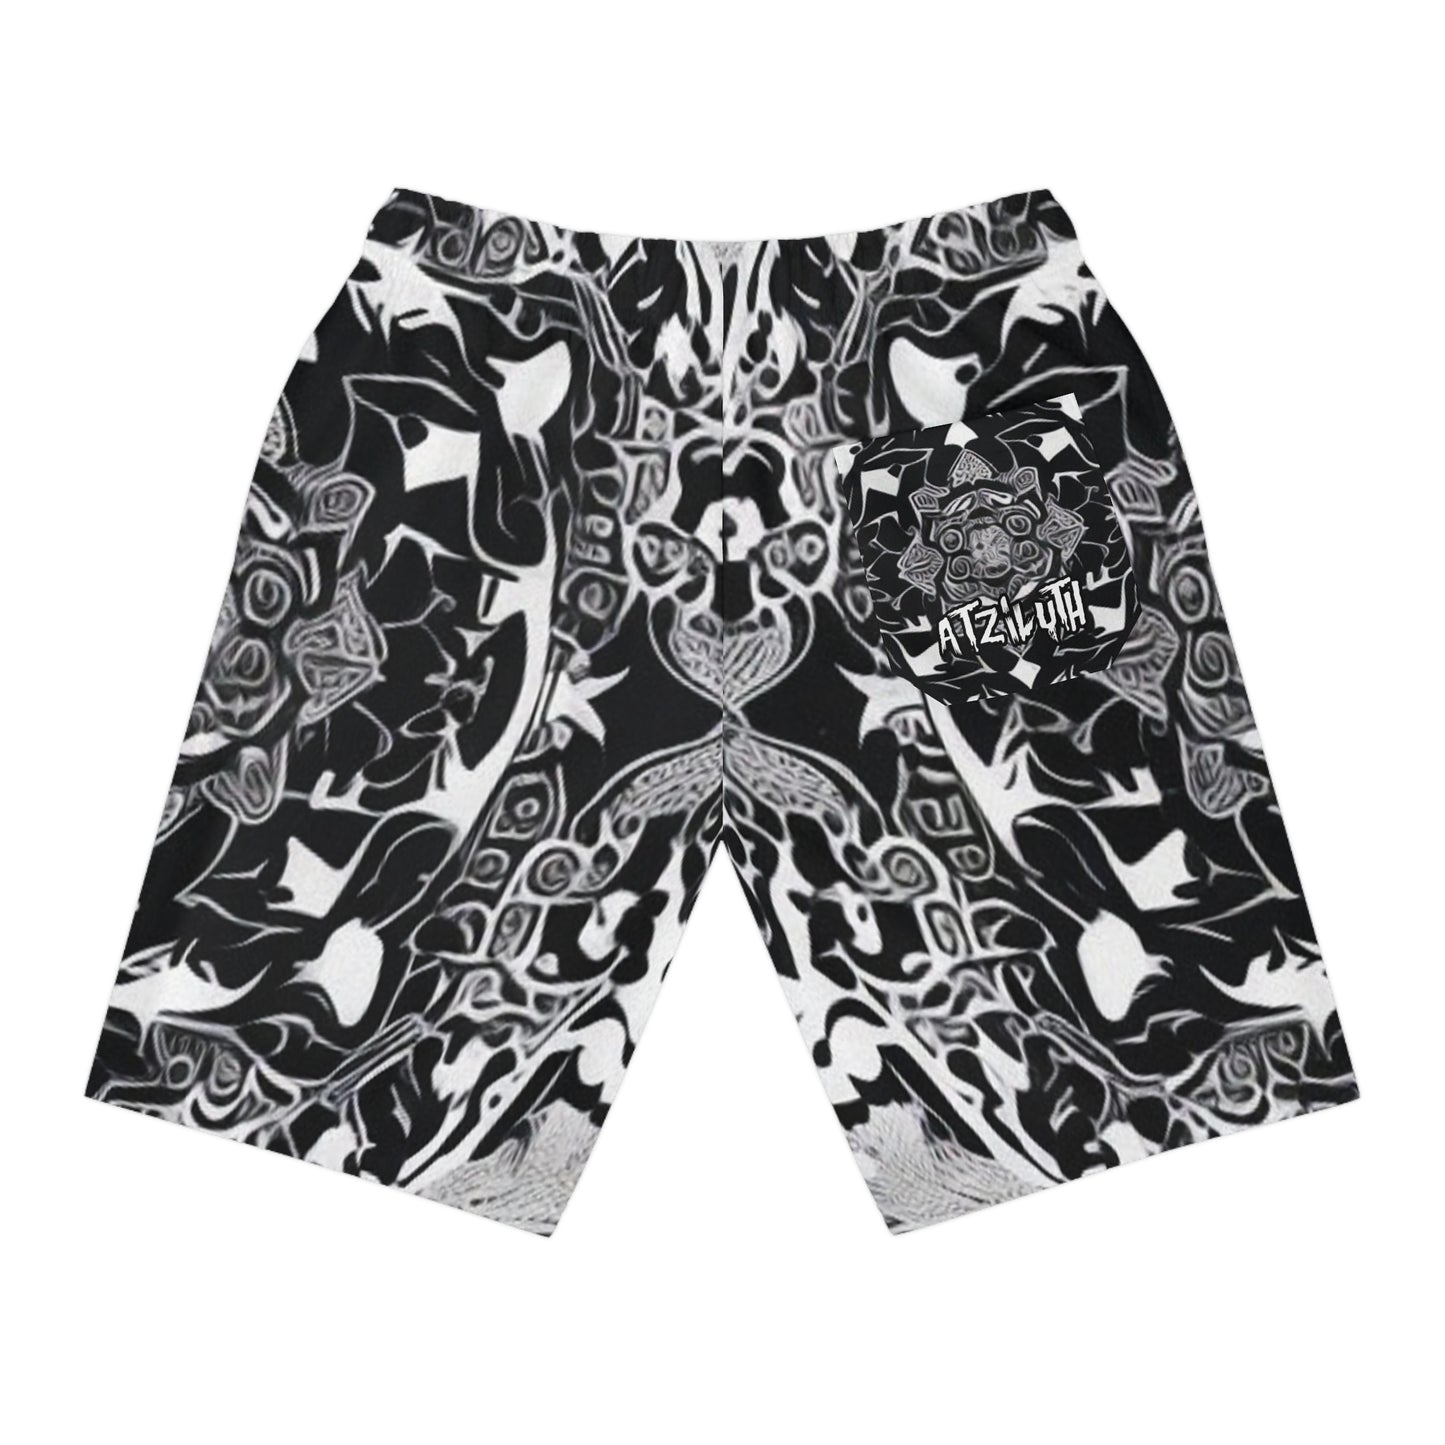 Atziluth Gallery " Abstract Print" Athletic Long Shorts